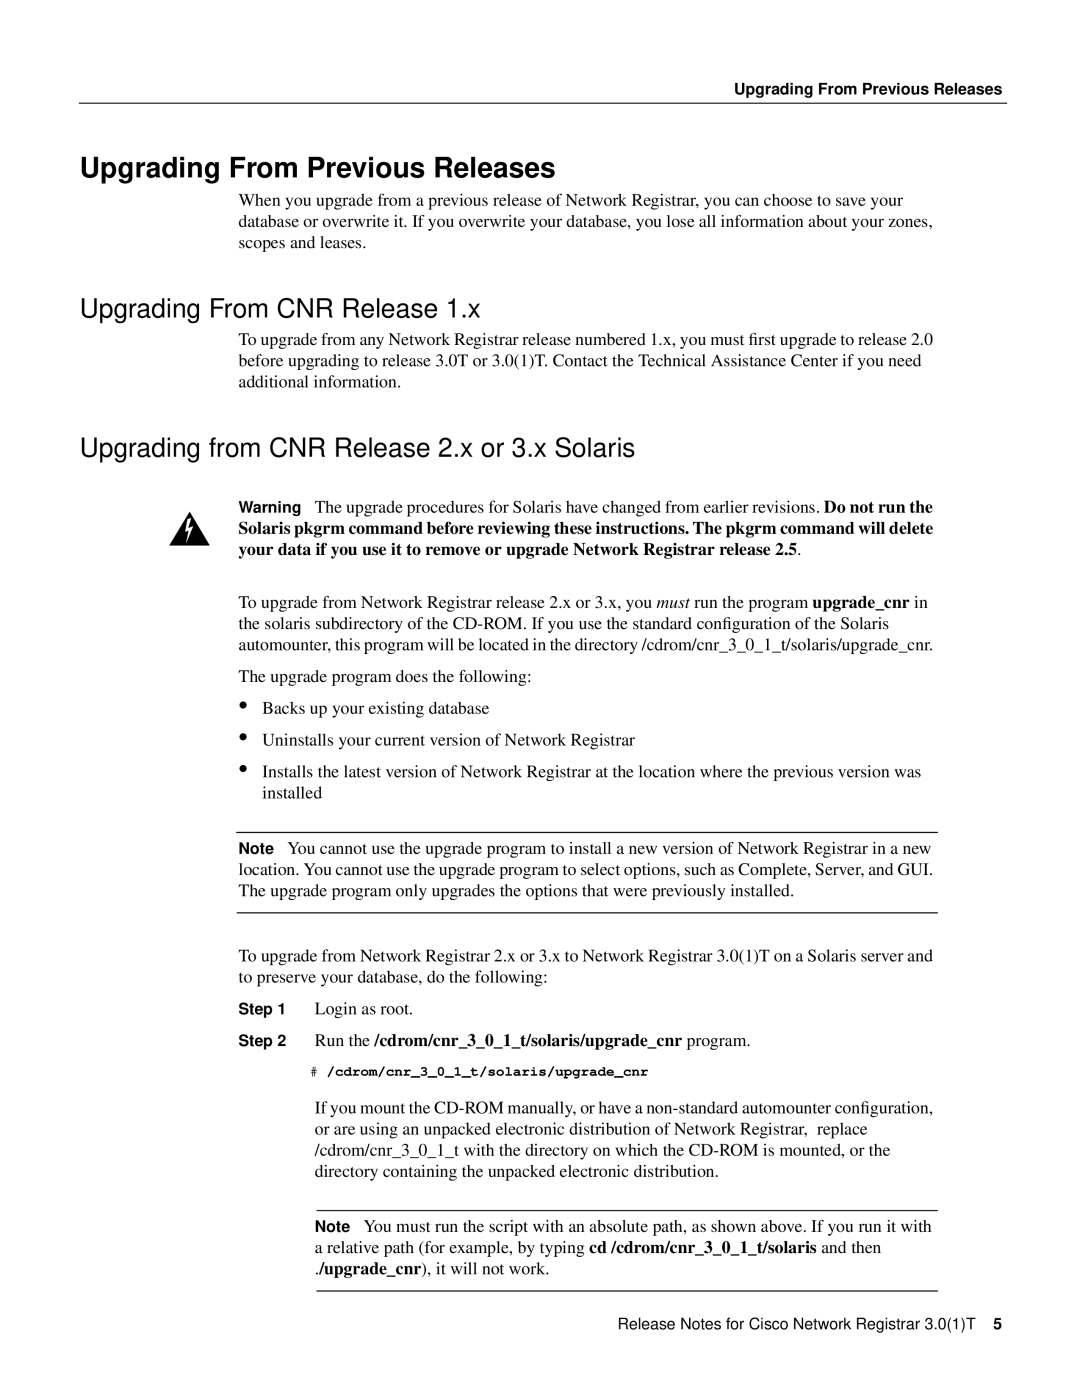 Cisco Systems 3.0(1) manual Upgrading From Previous Releases, Upgrading From CNR Release 